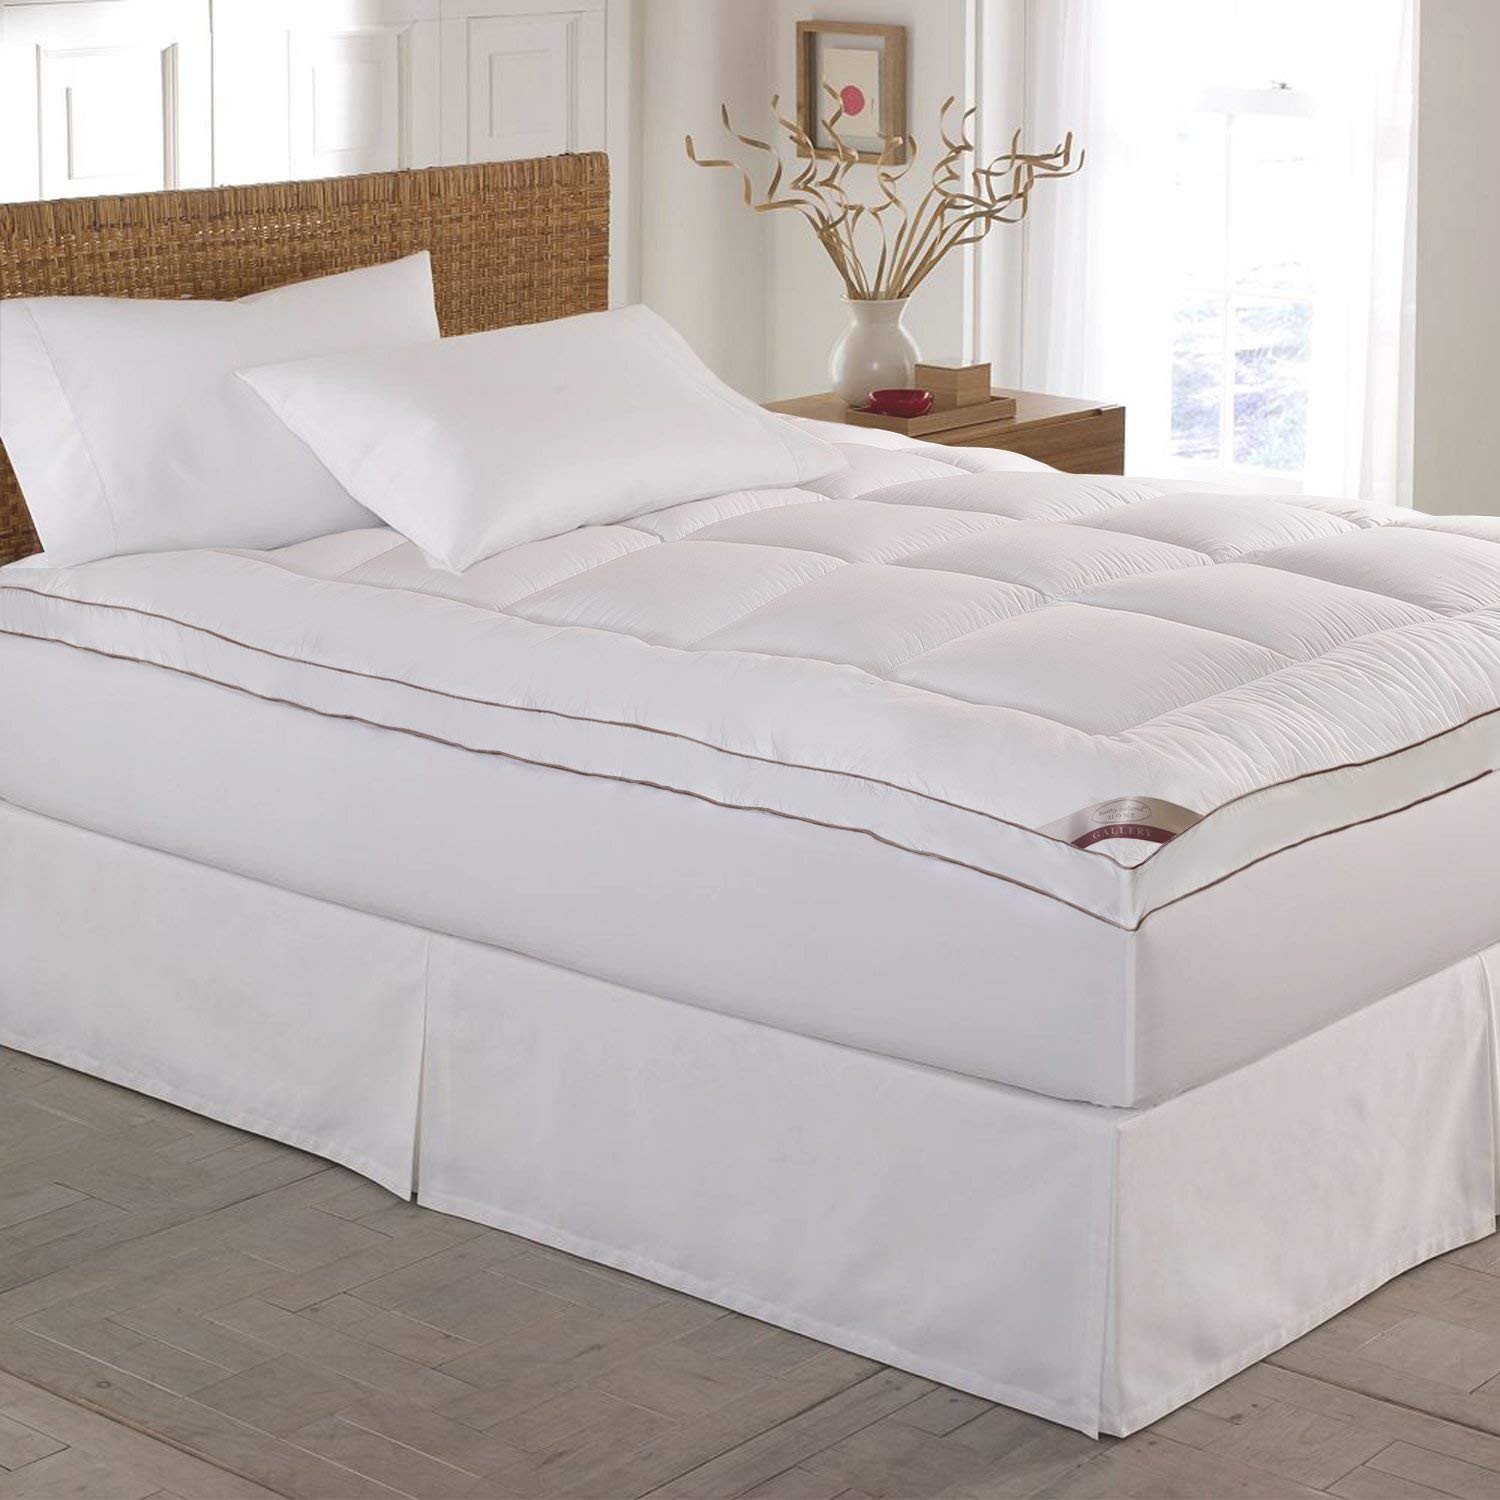 Kathy Ireland Bedroom Furniture Lovely Kathy Ireland 2 Thick Cotton Fiber Mattress Pad topper with 16 Stretchable Pocket King White